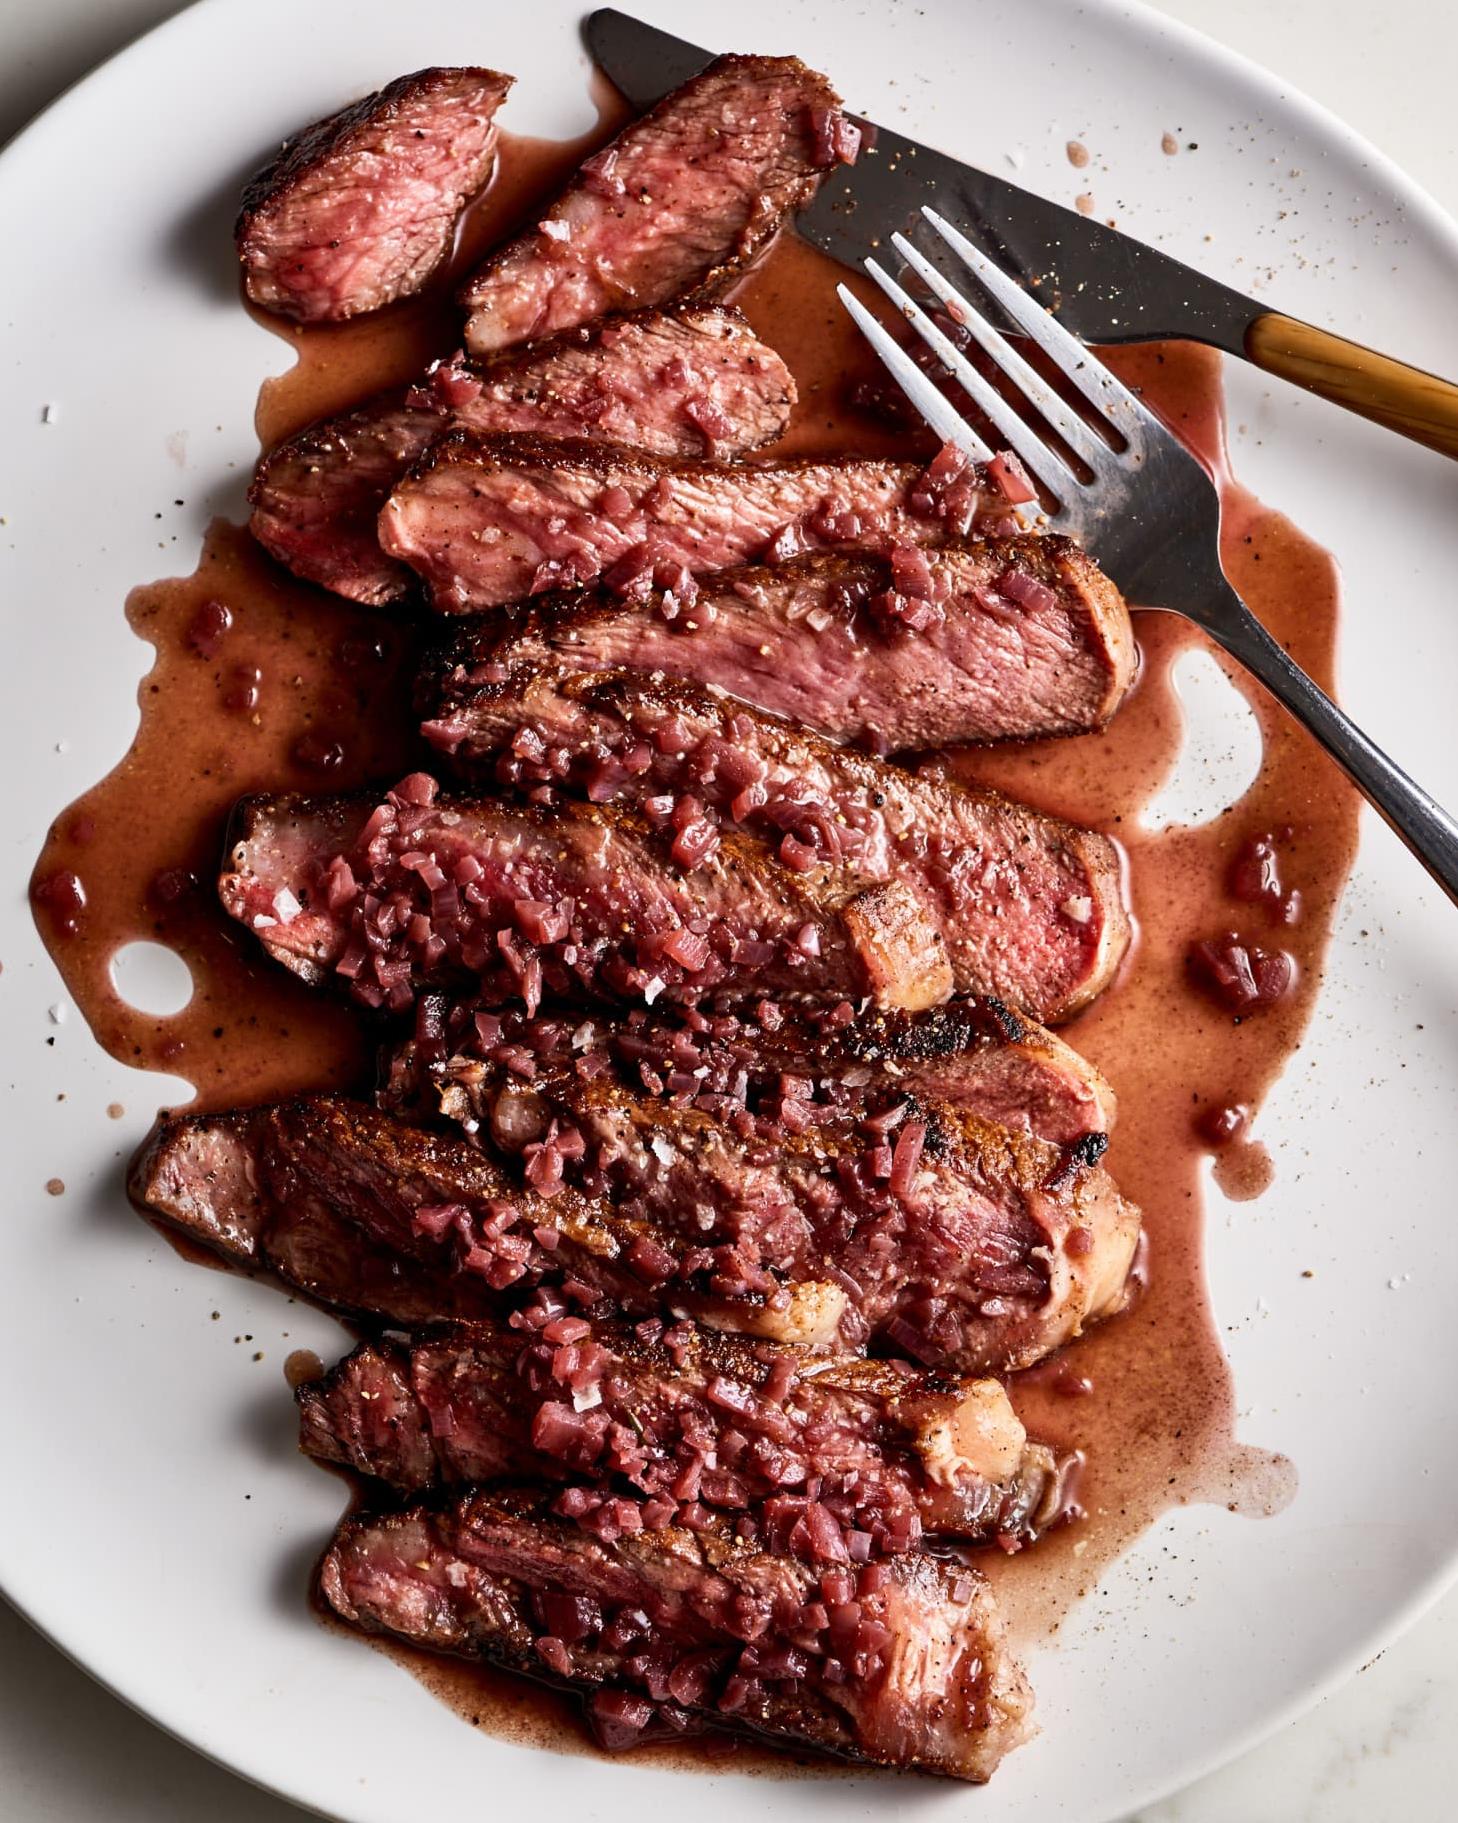  This shallot and red wine sauce will be the crowning jewel of your meal, so make sure to give it the attention it deserves.